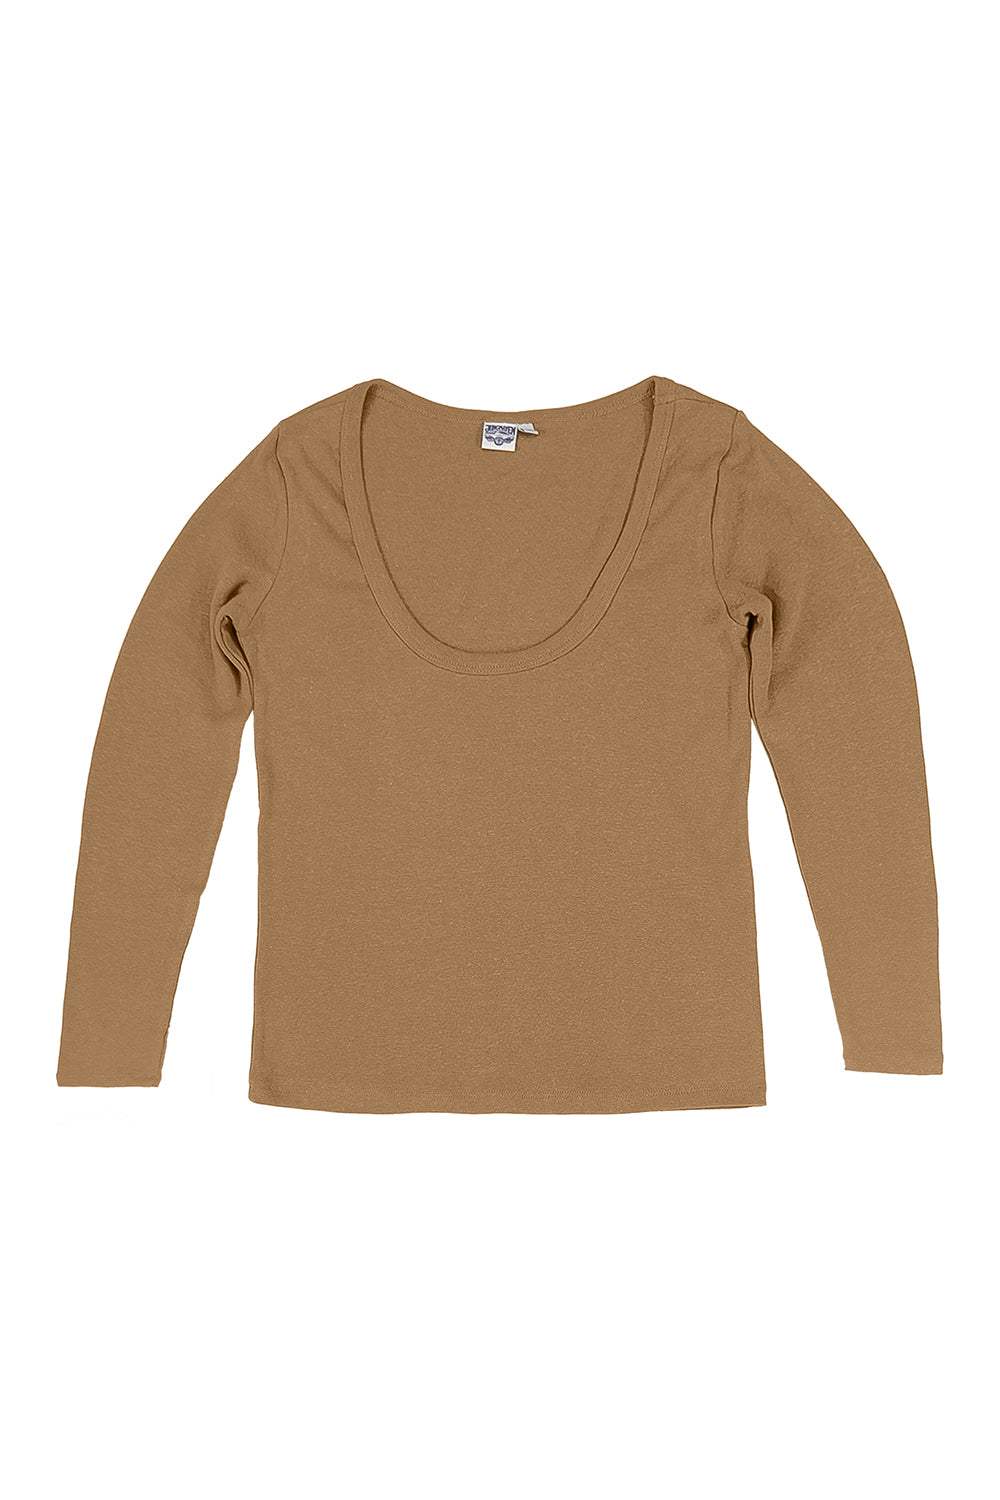 Paseo Long Sleeve Tee | Jungmaven Hemp Clothing & Accessories / Color: Coyote